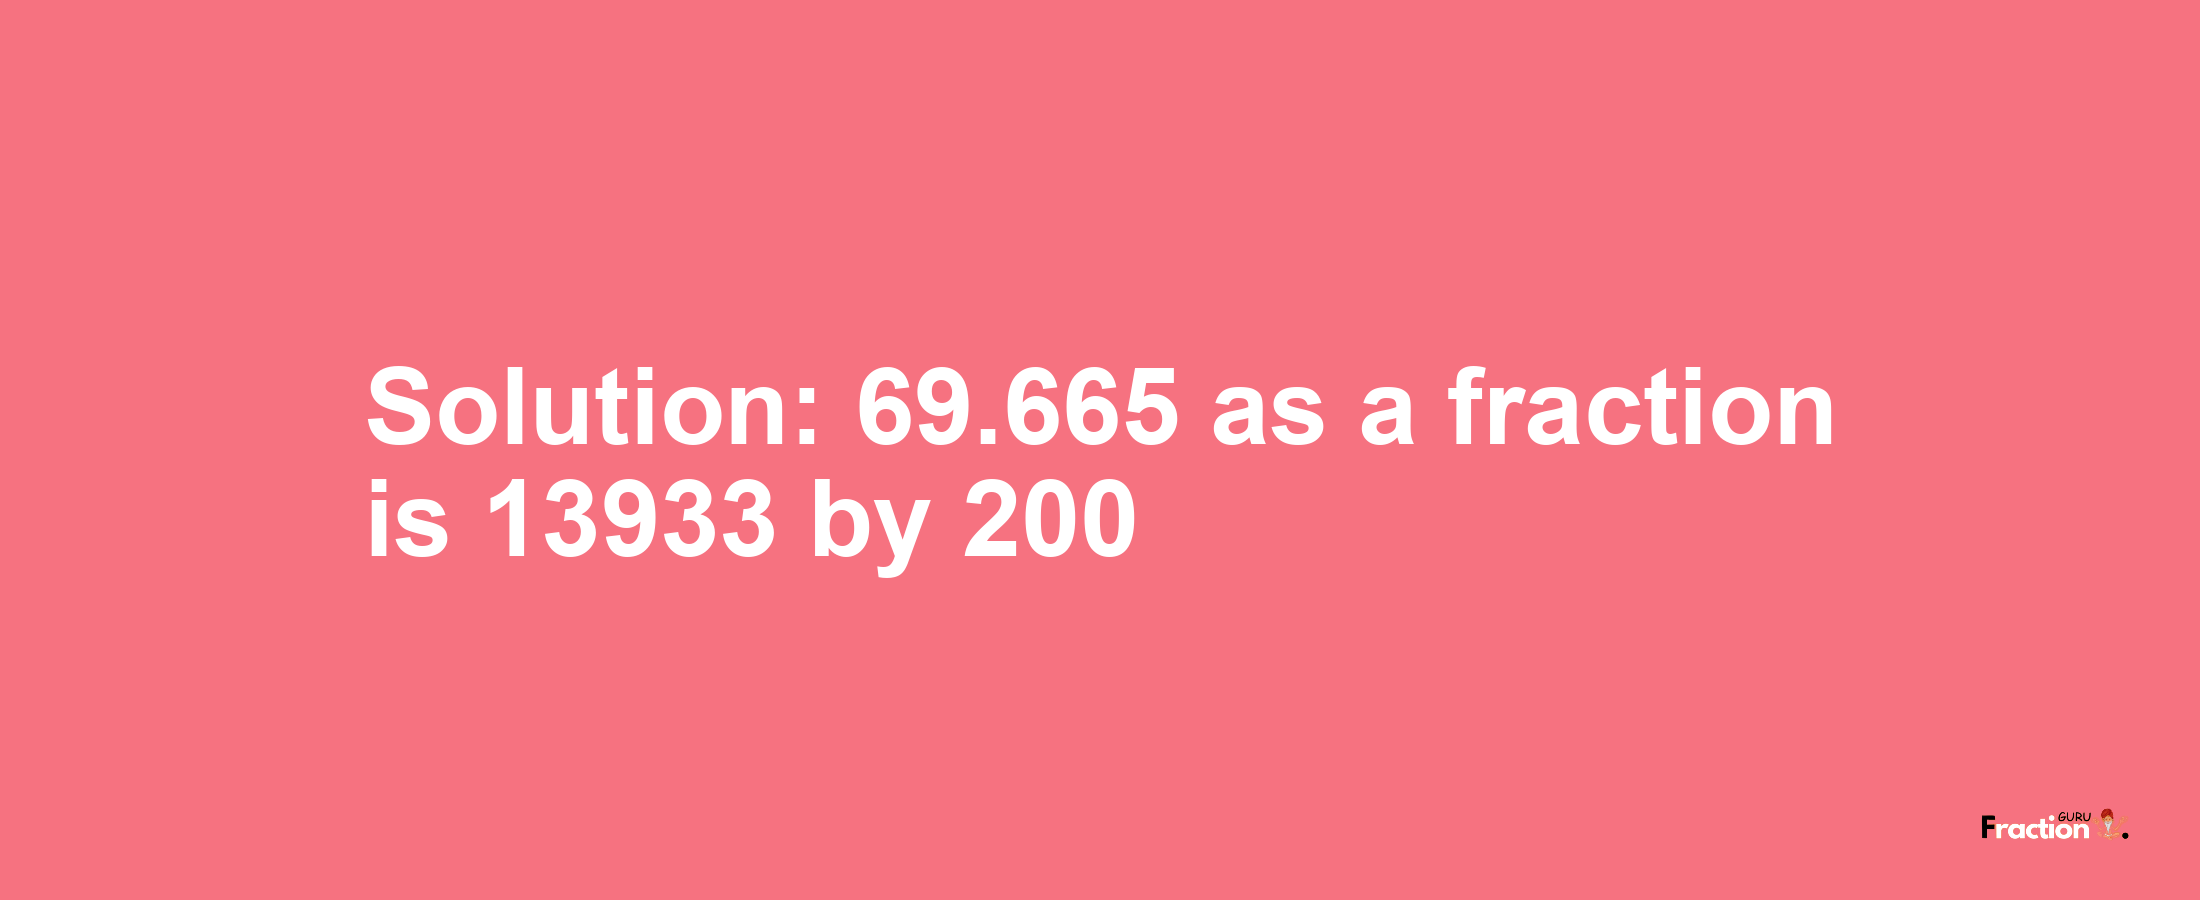 Solution:69.665 as a fraction is 13933/200